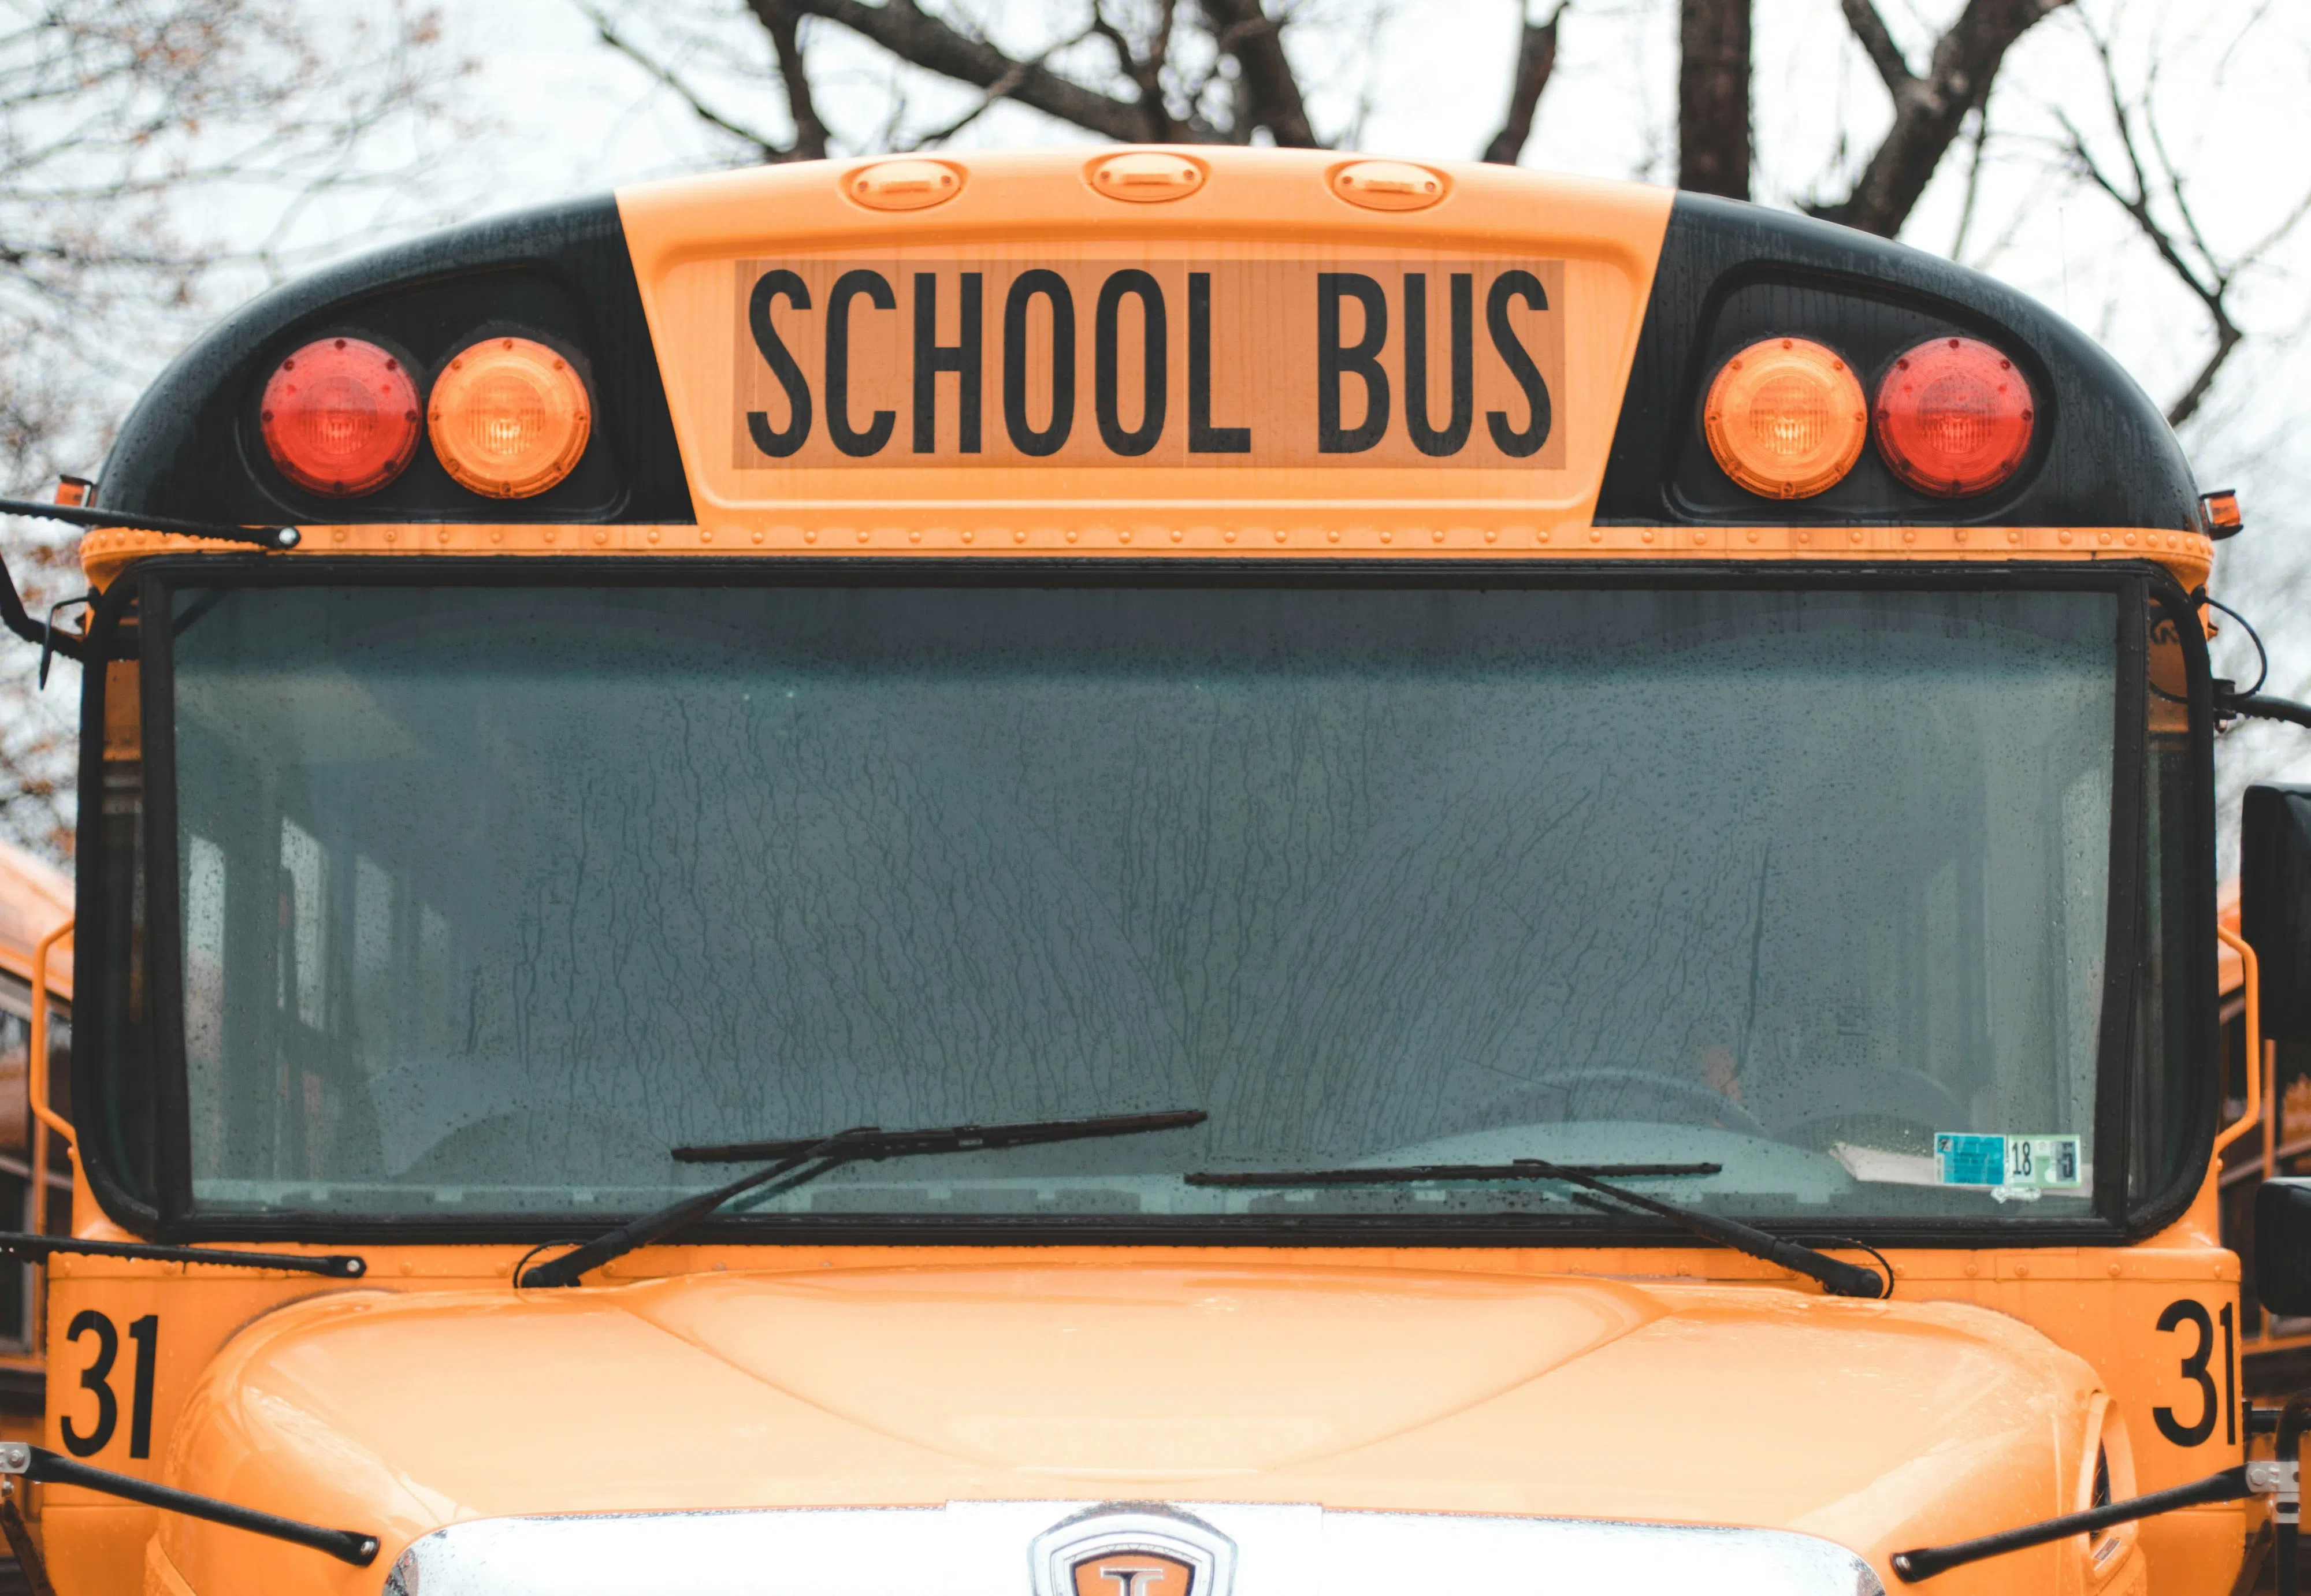 Not all school bus drivers meet licensing, training requirements: audit